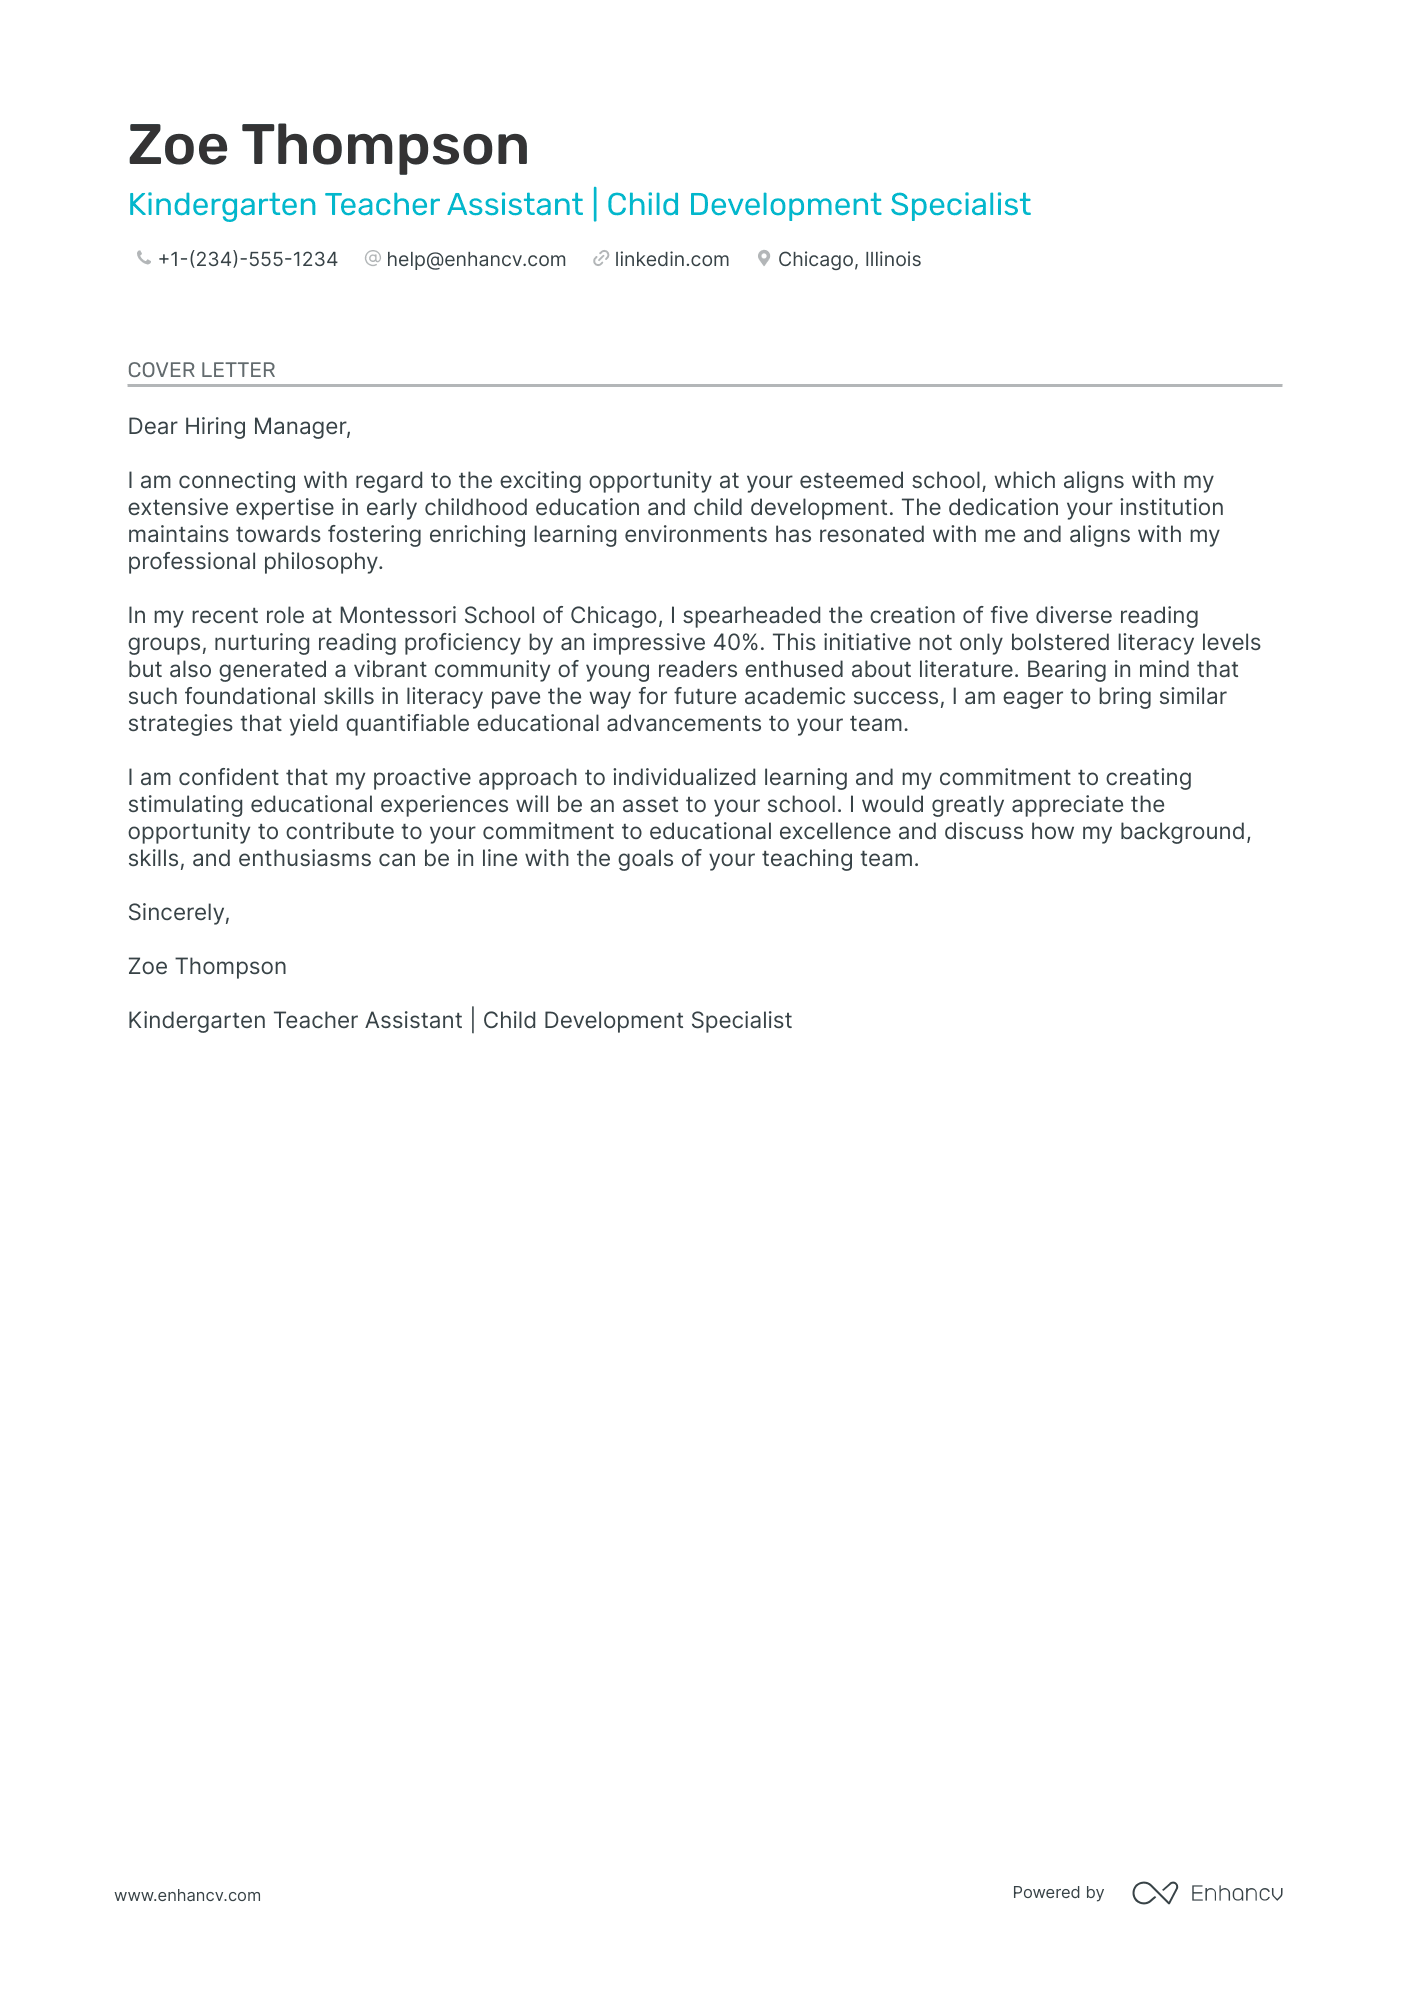 a cover letter for a teaching assistant position